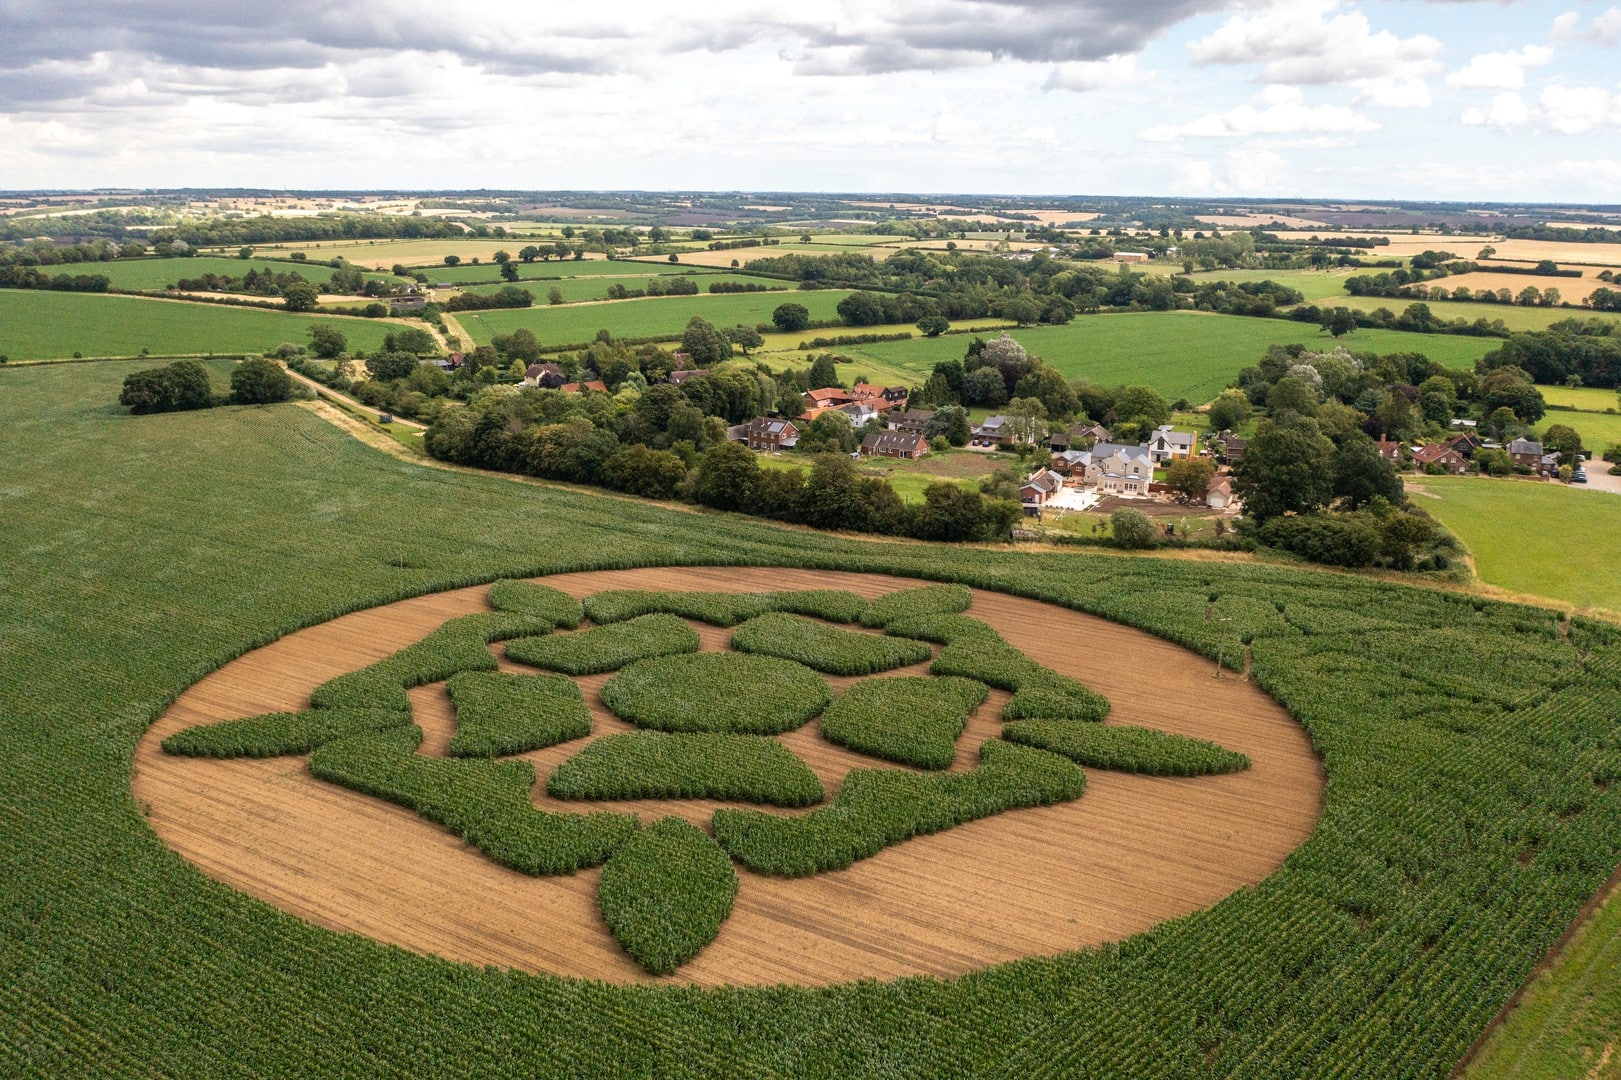 Tuckwells Creates Maize Maze Behind The Lindsey Rose in Hadleigh, Suffolk